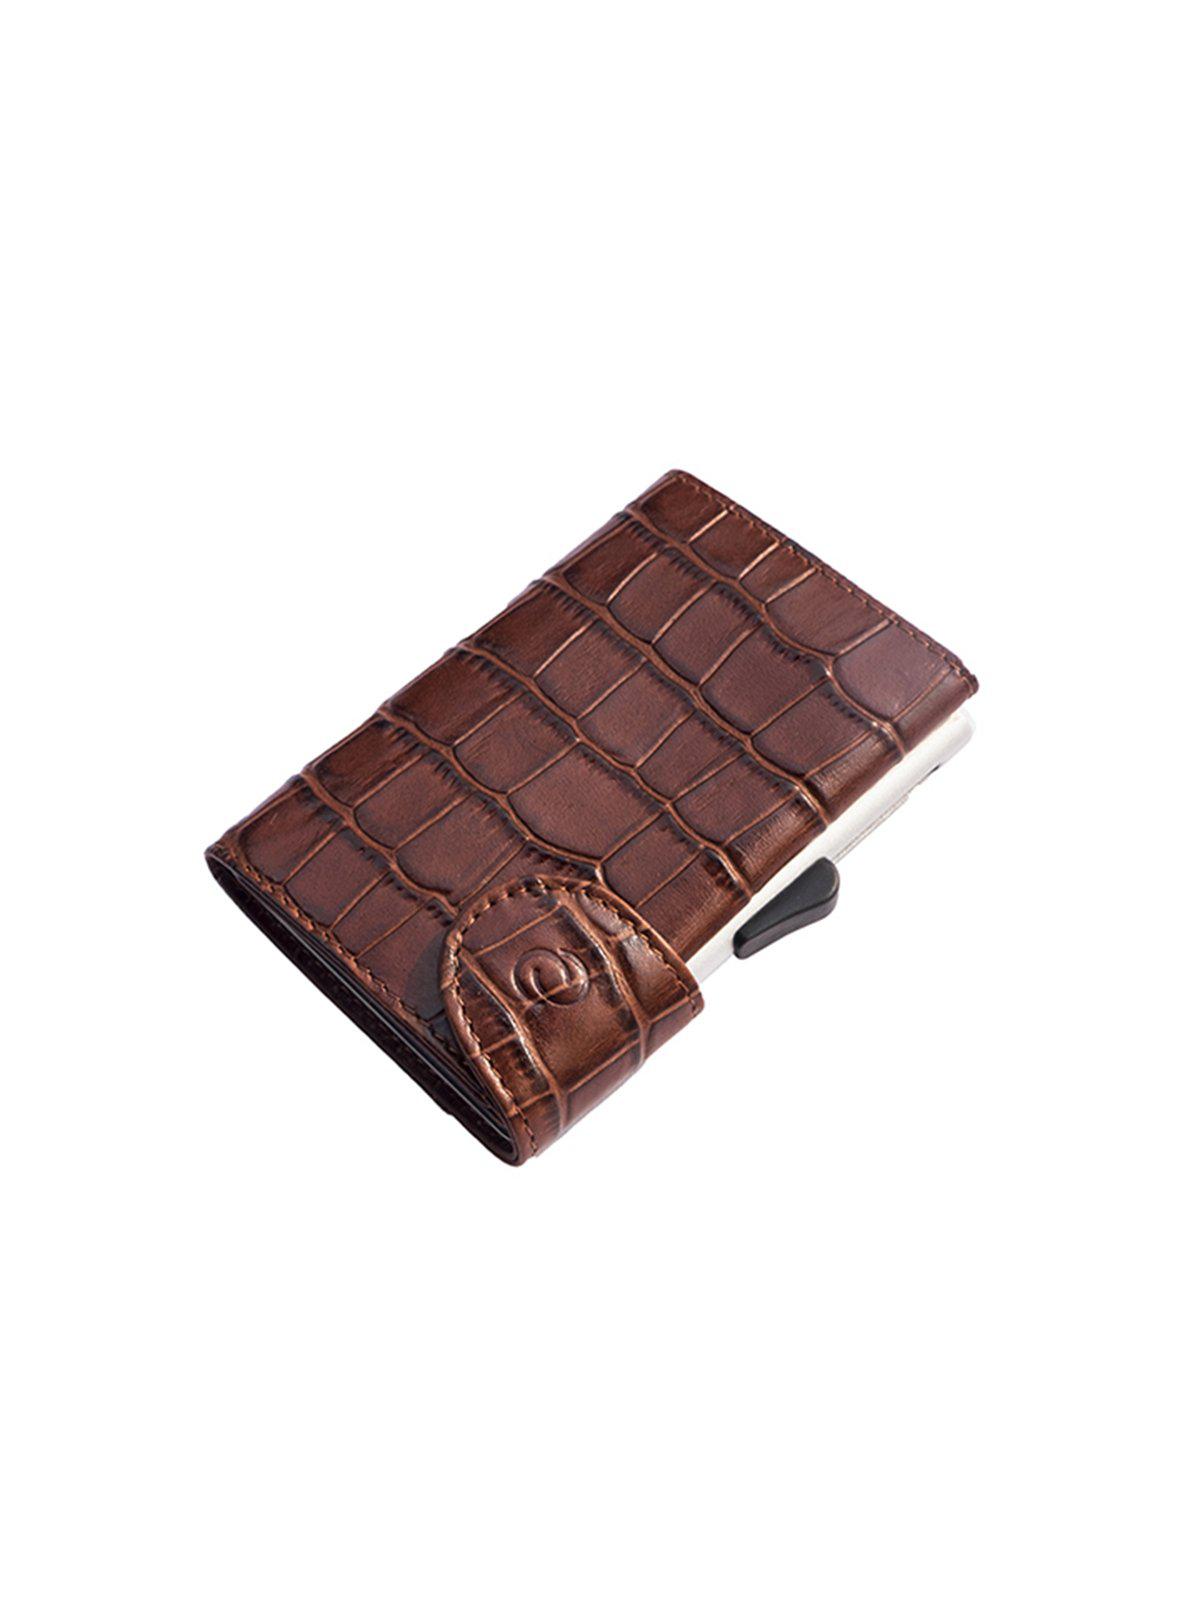 C-Secure Croco Leather RFID Wallet Brown - MORE by Morello Indonesia